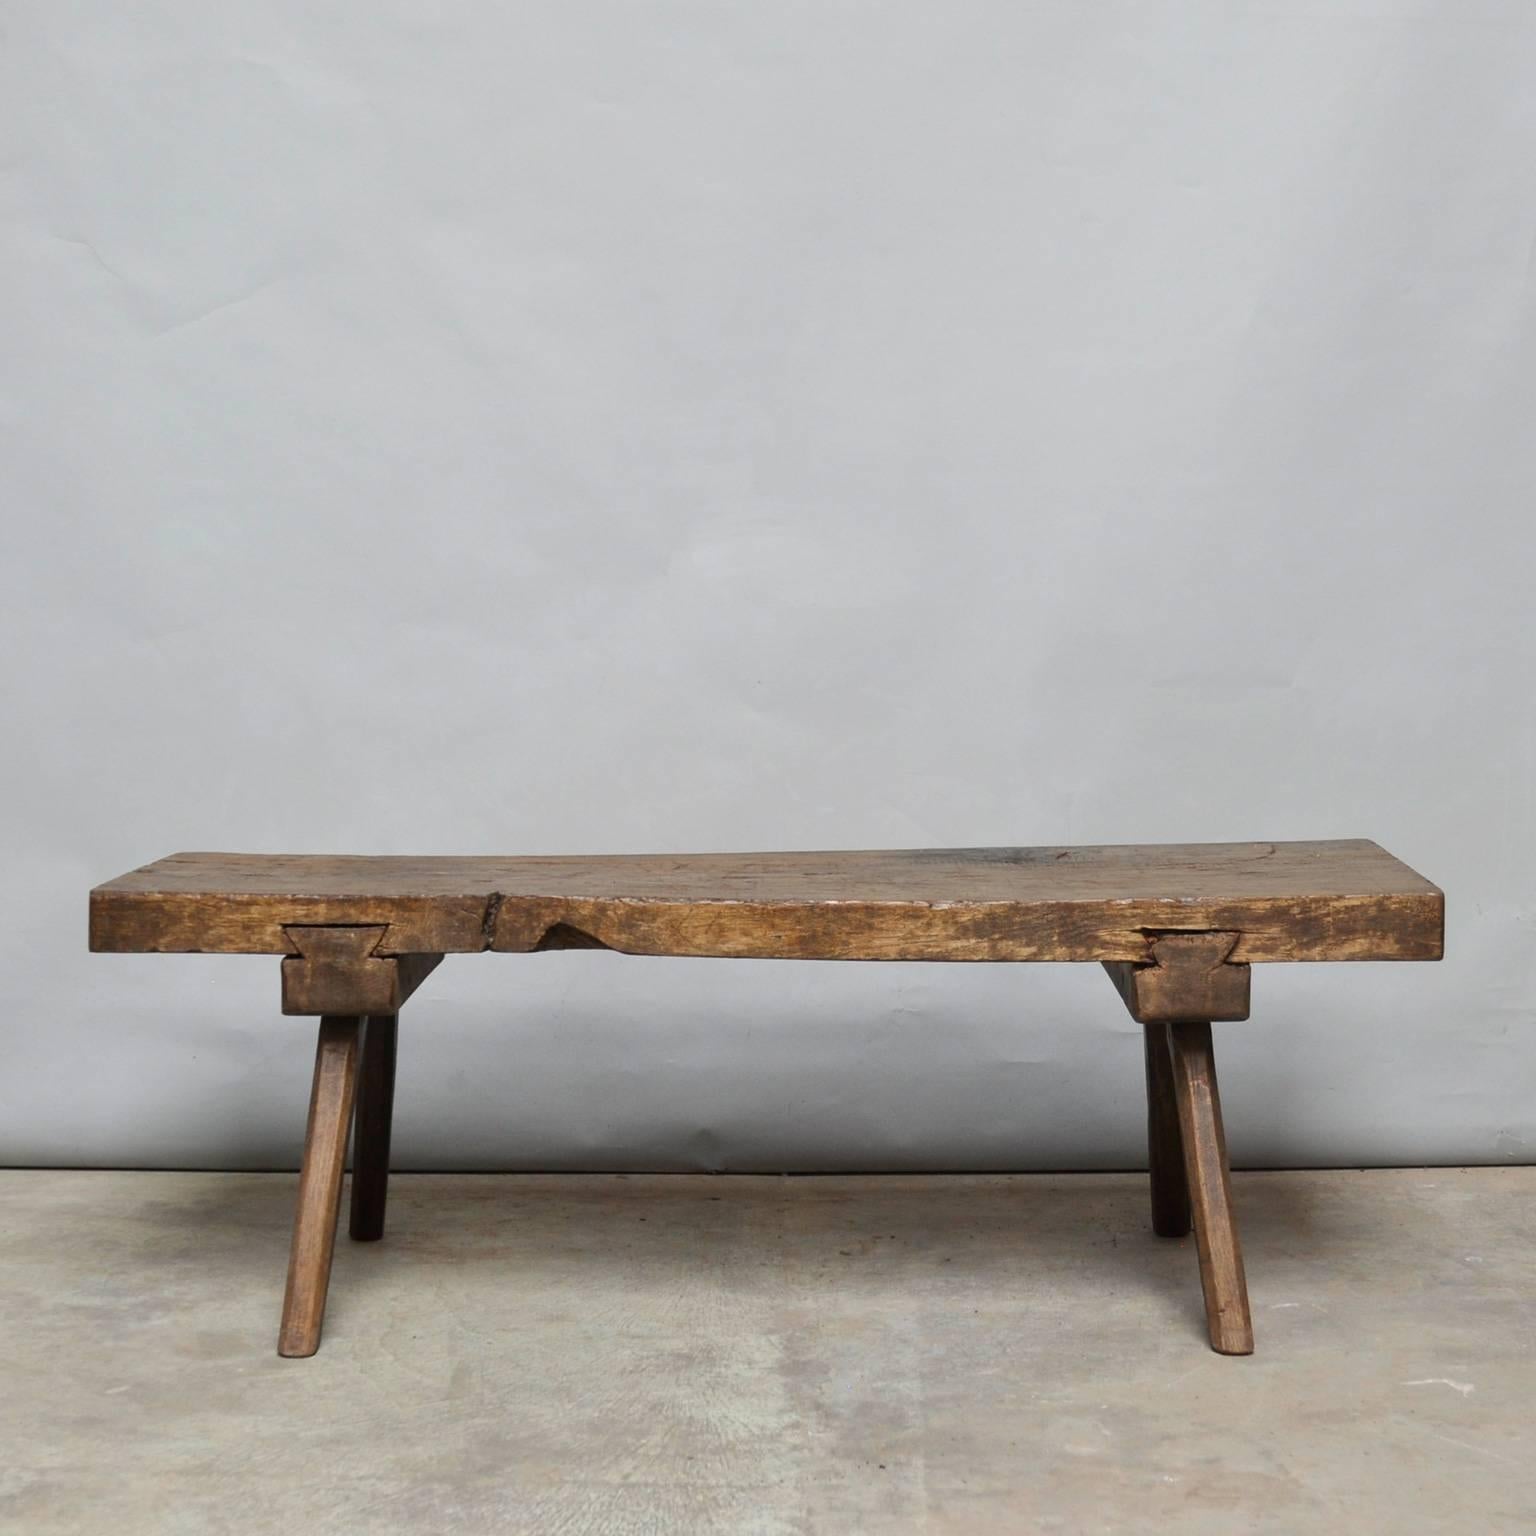 This oak butcher's block with a 10 cm thick top was produced in Hungary around the 1930s. The piece features the original oak legs, and has been wax-finished. The block has been cut down to a standard coffee table/bench size.